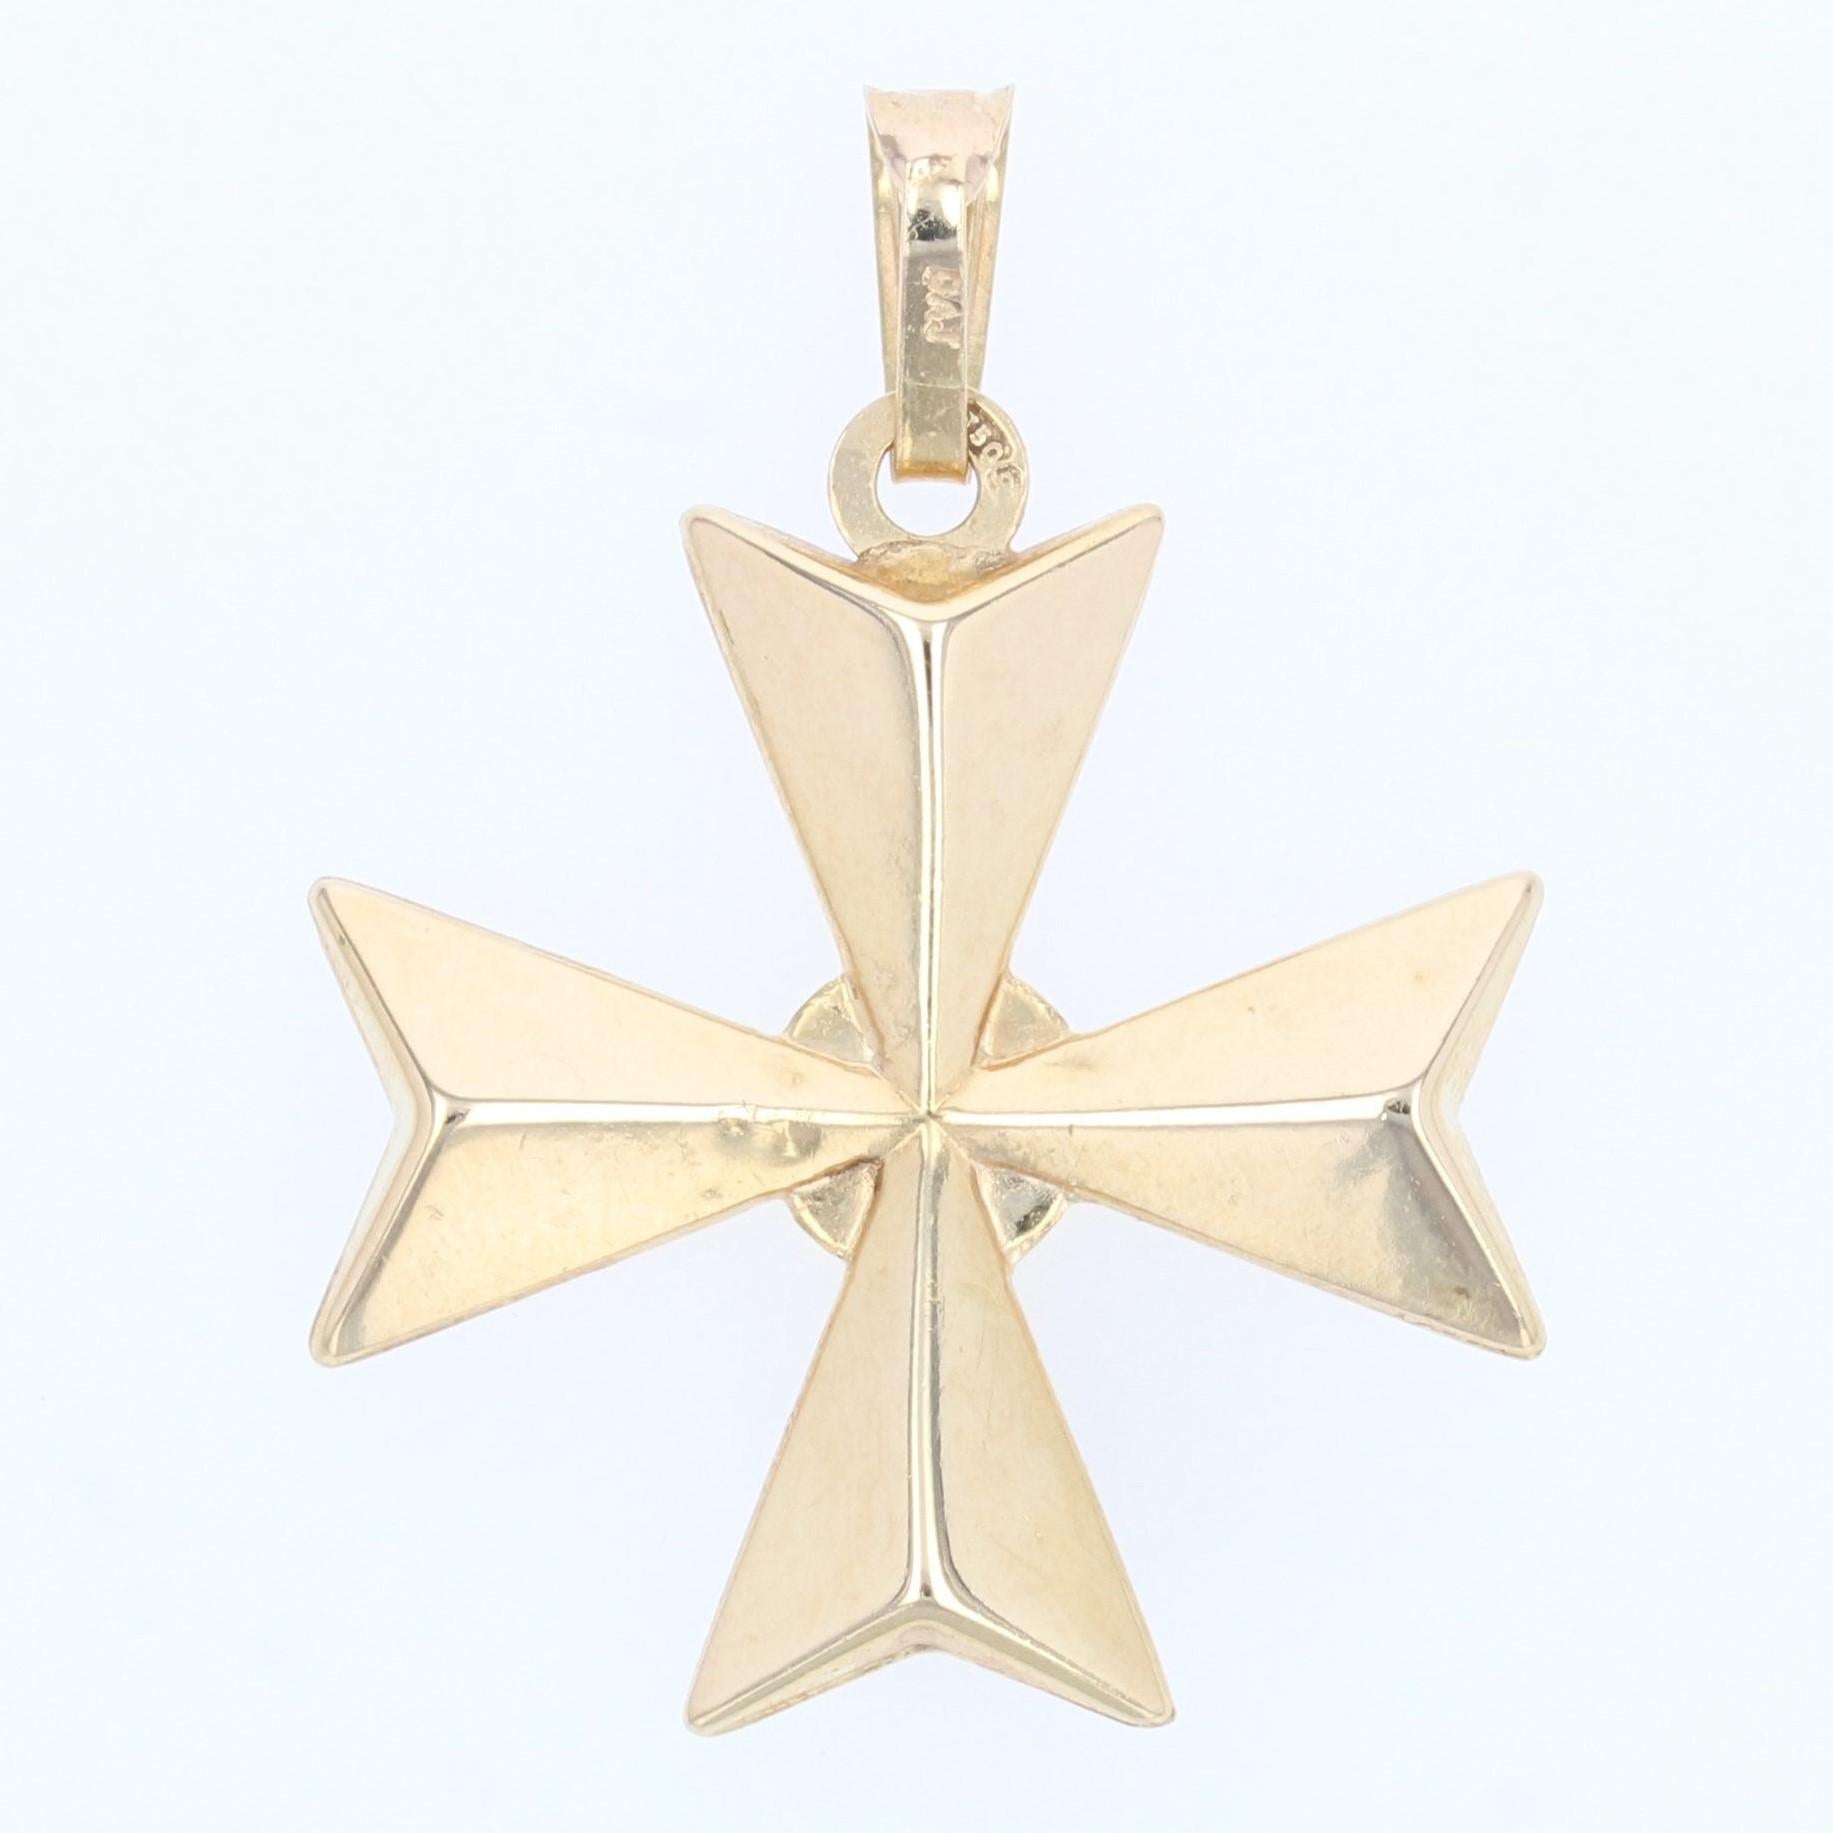 Cross in 18 karat yellow gold.
This Maltese cross is realized in relief and facetted.
Pendant sold alone without its chain of presentation.
Height : 3,5 cm, width : 2,5 cm, thickness at most : 3,8 mm.
Total weight of the jewel : 1,8 g